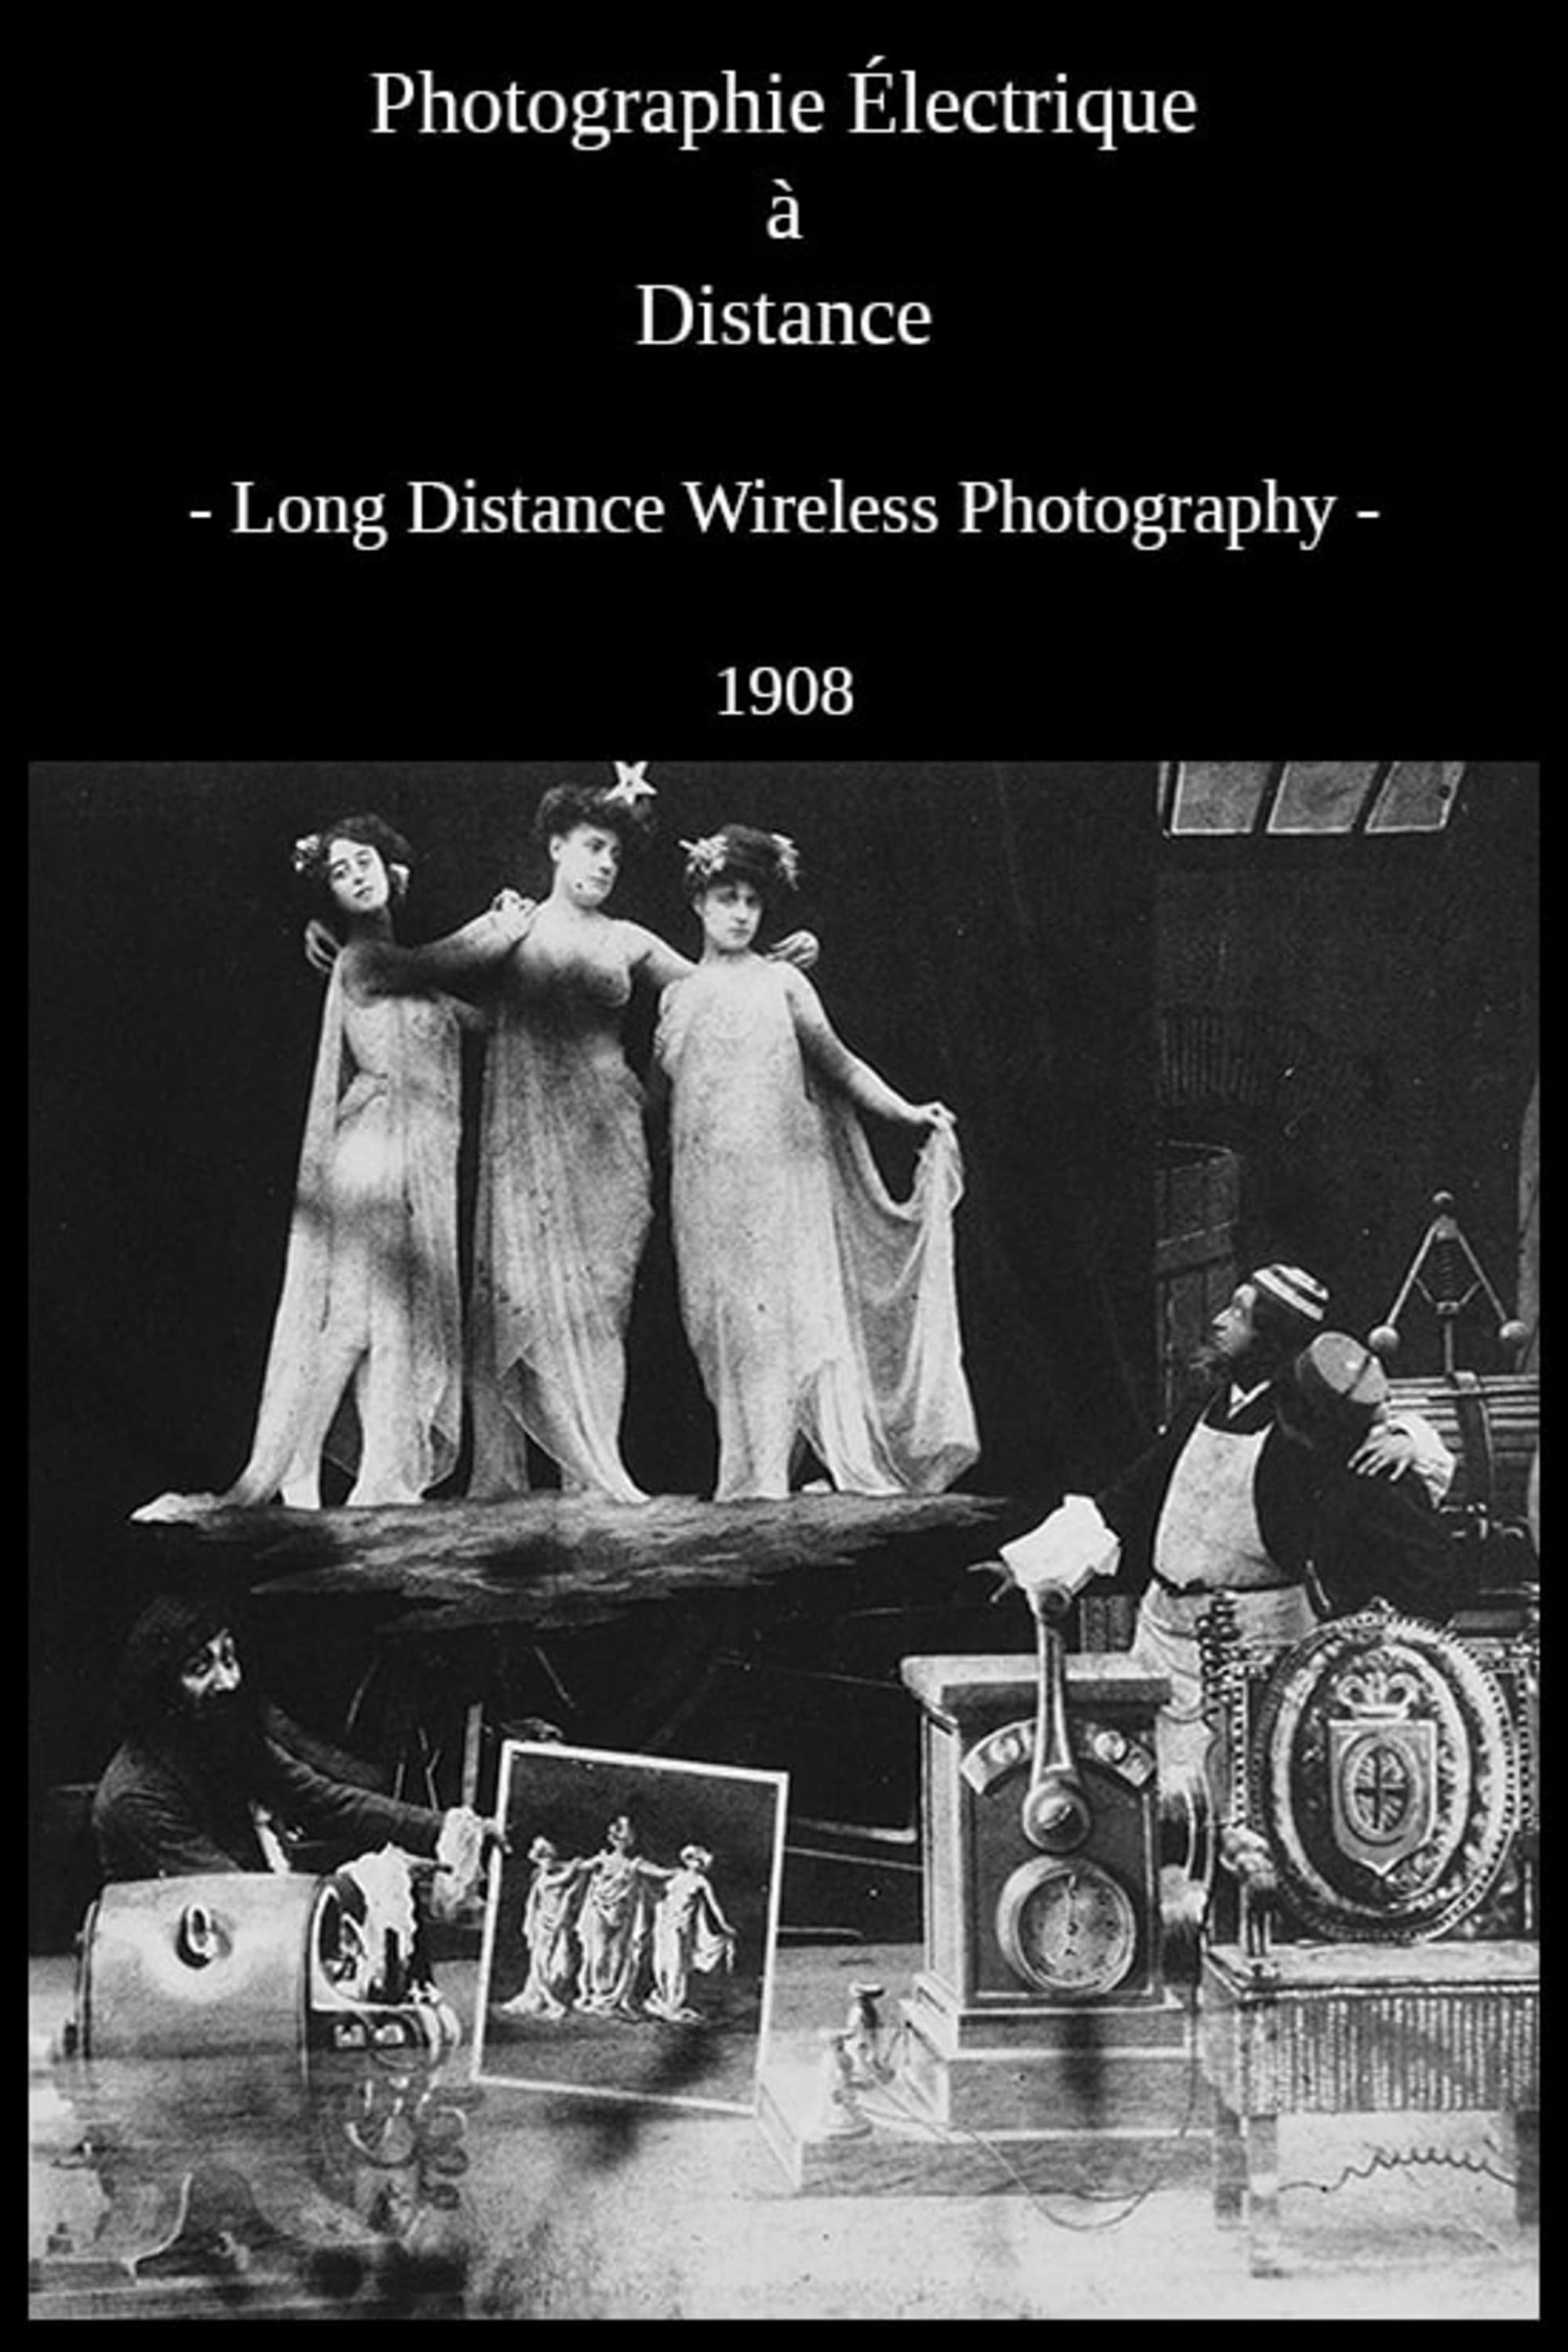 Long Distance Wireless Photography